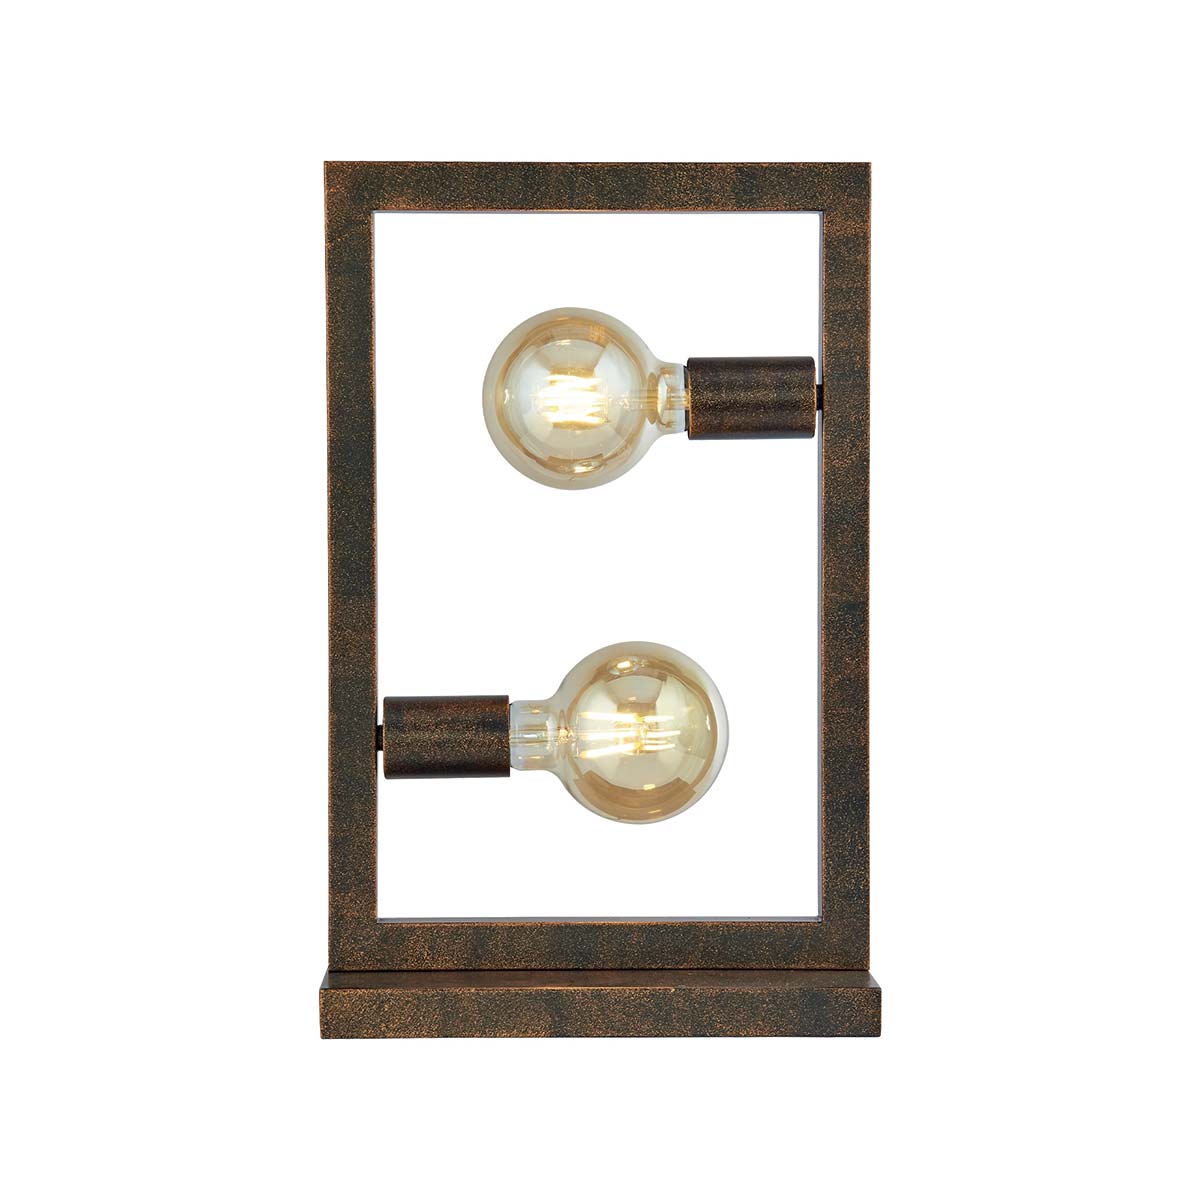 Oblong 2 Light Table Lamp Rustic Brown Industrial Style